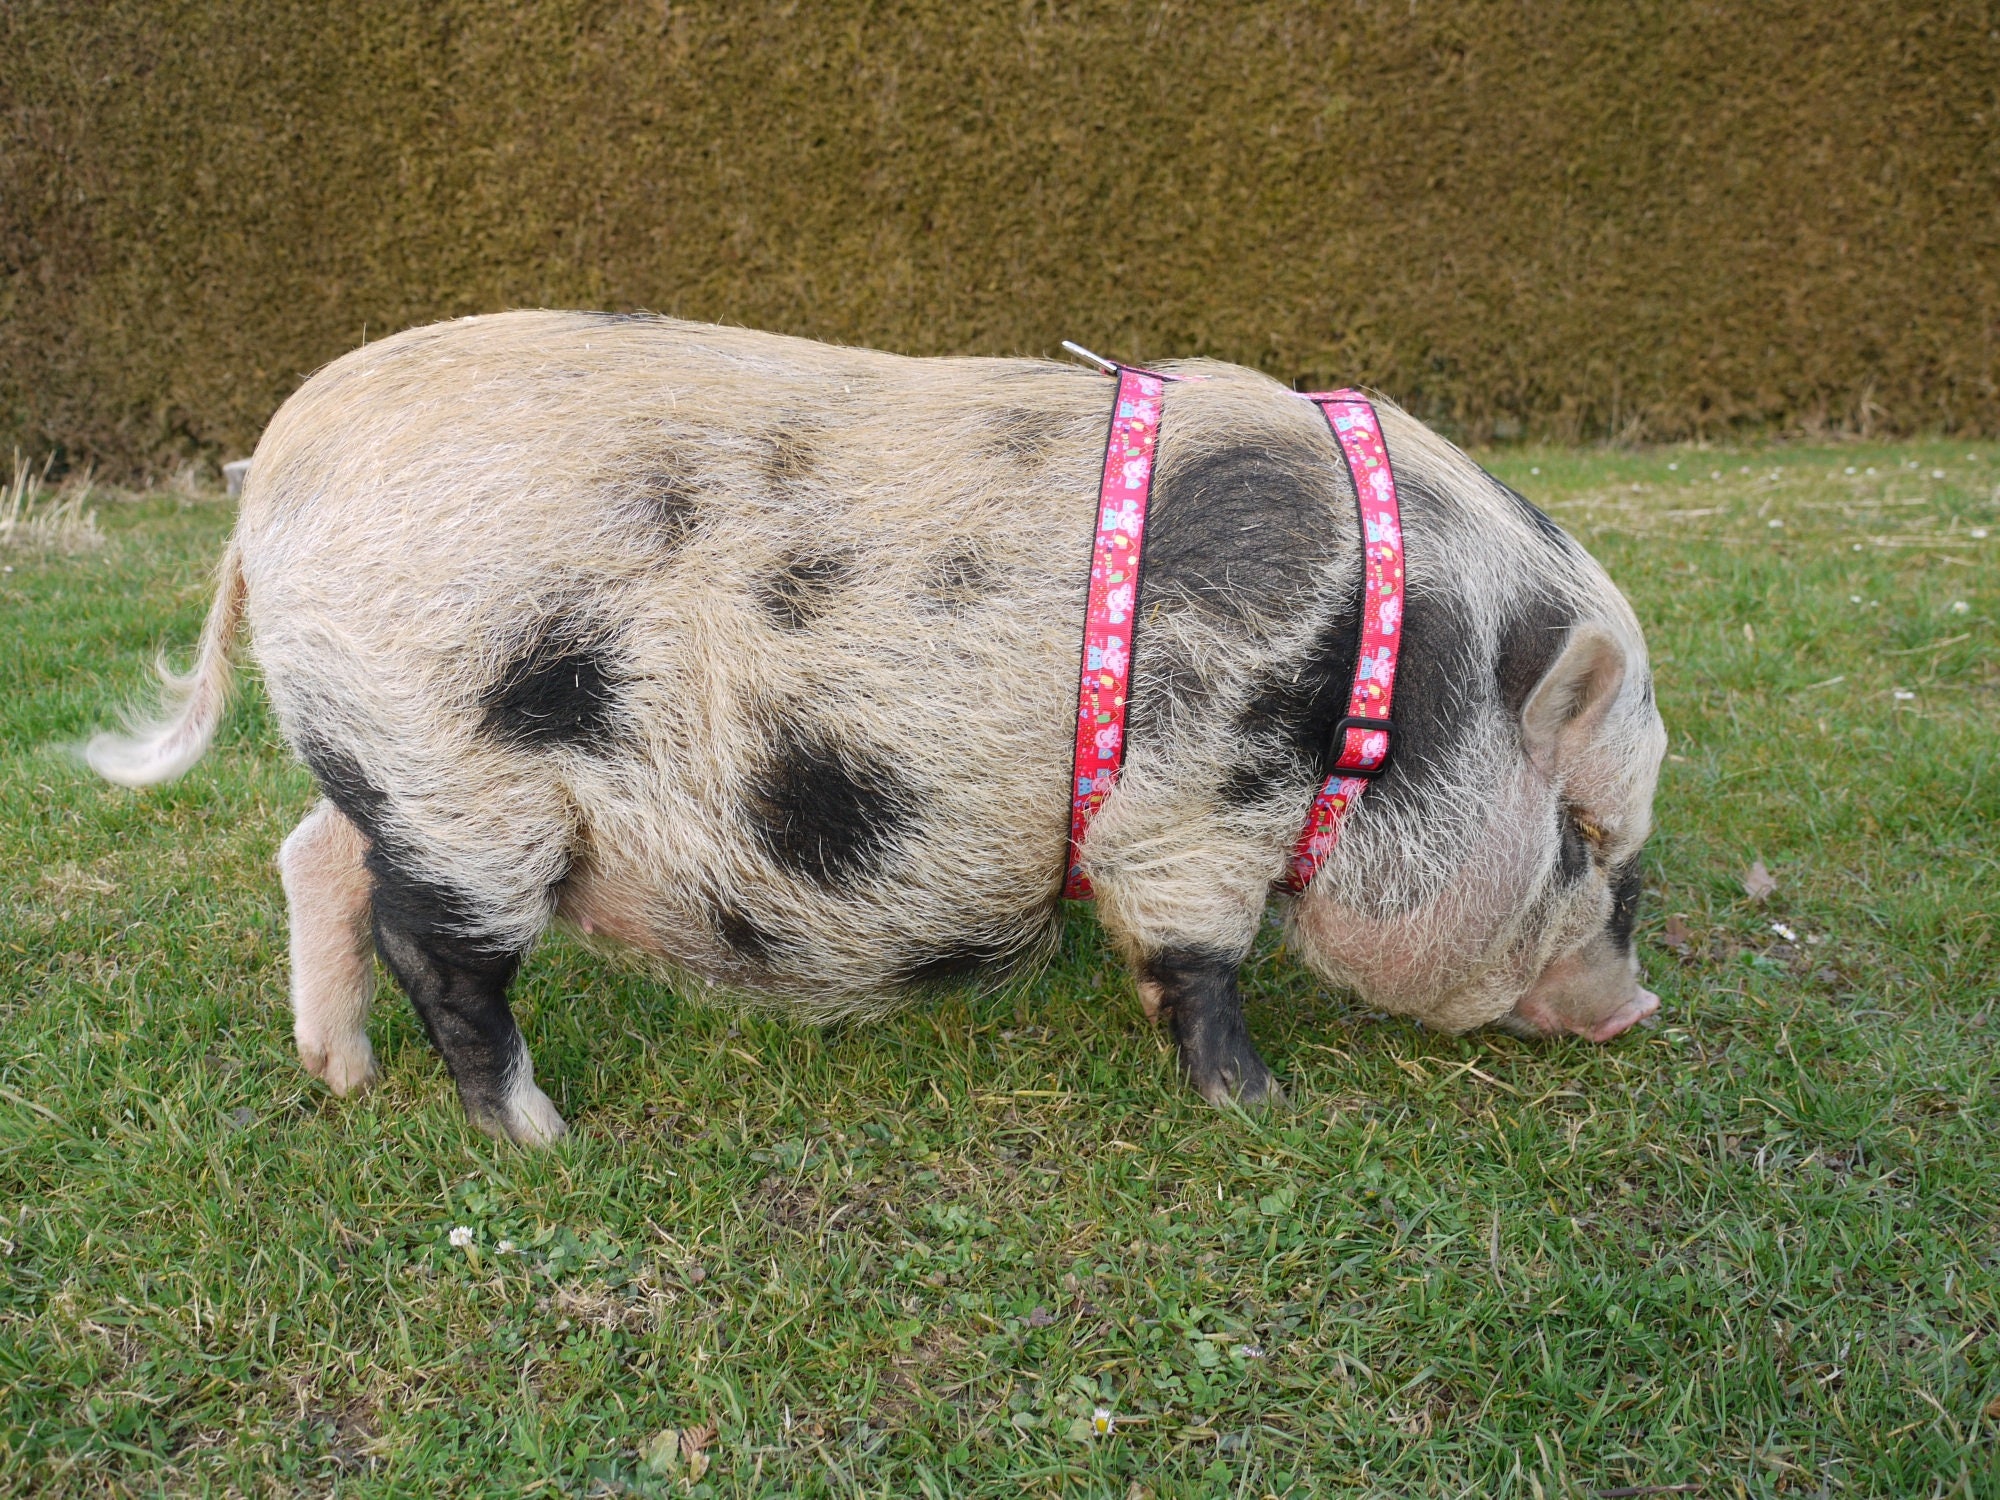 2" Wide Mini Pig Harnesses by Pig Gear 